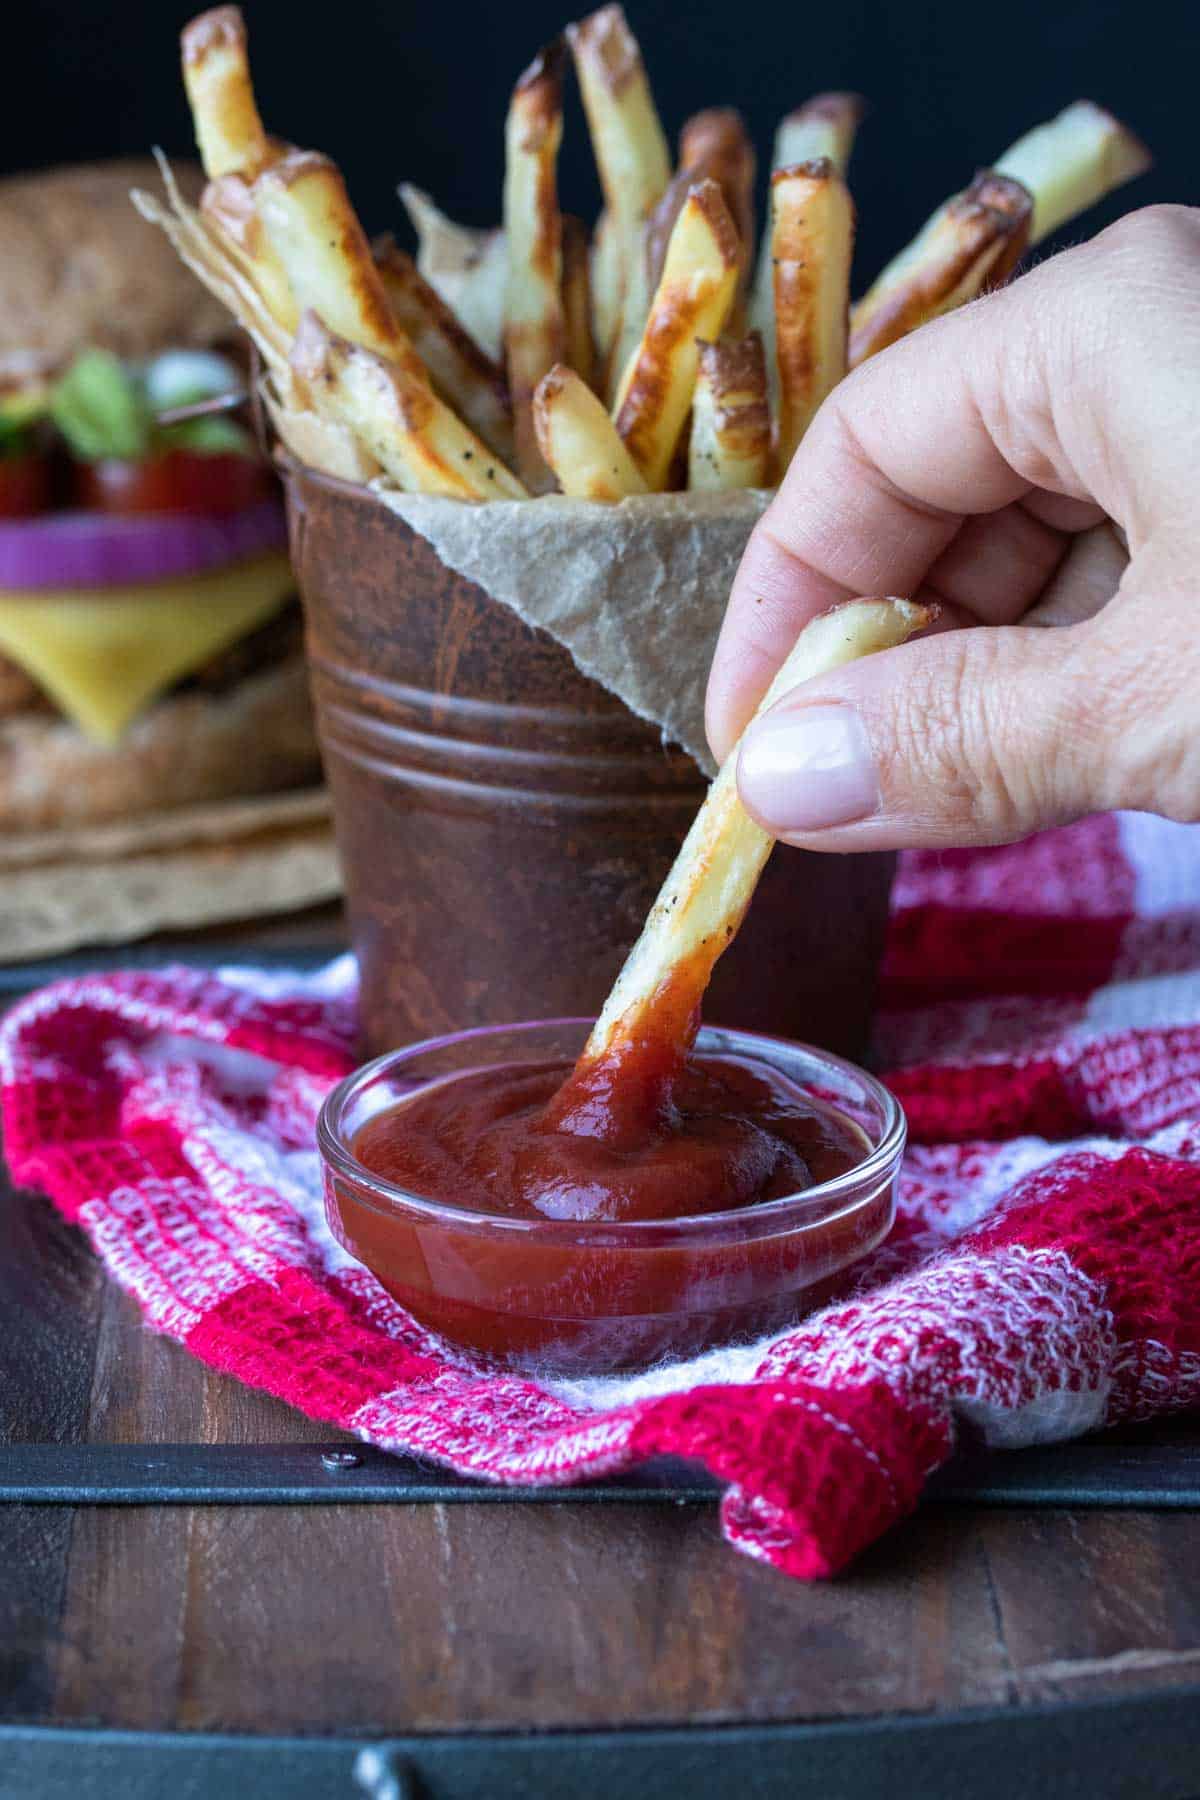 Hand dipping a french fry in a small glass bowl of ketchup.